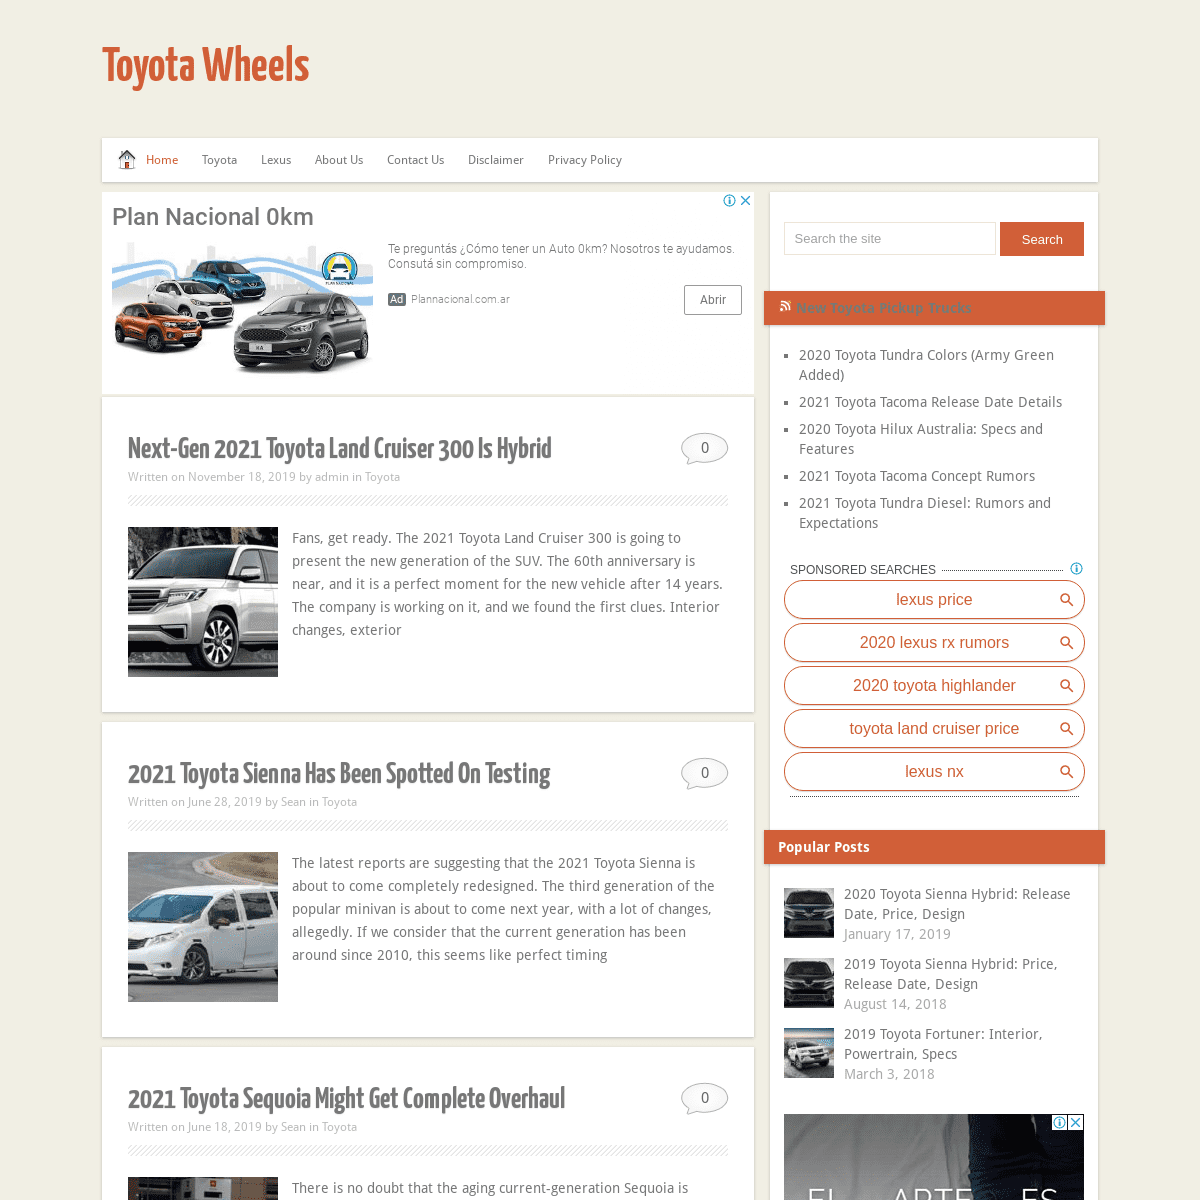 A complete backup of toyotawheels.com